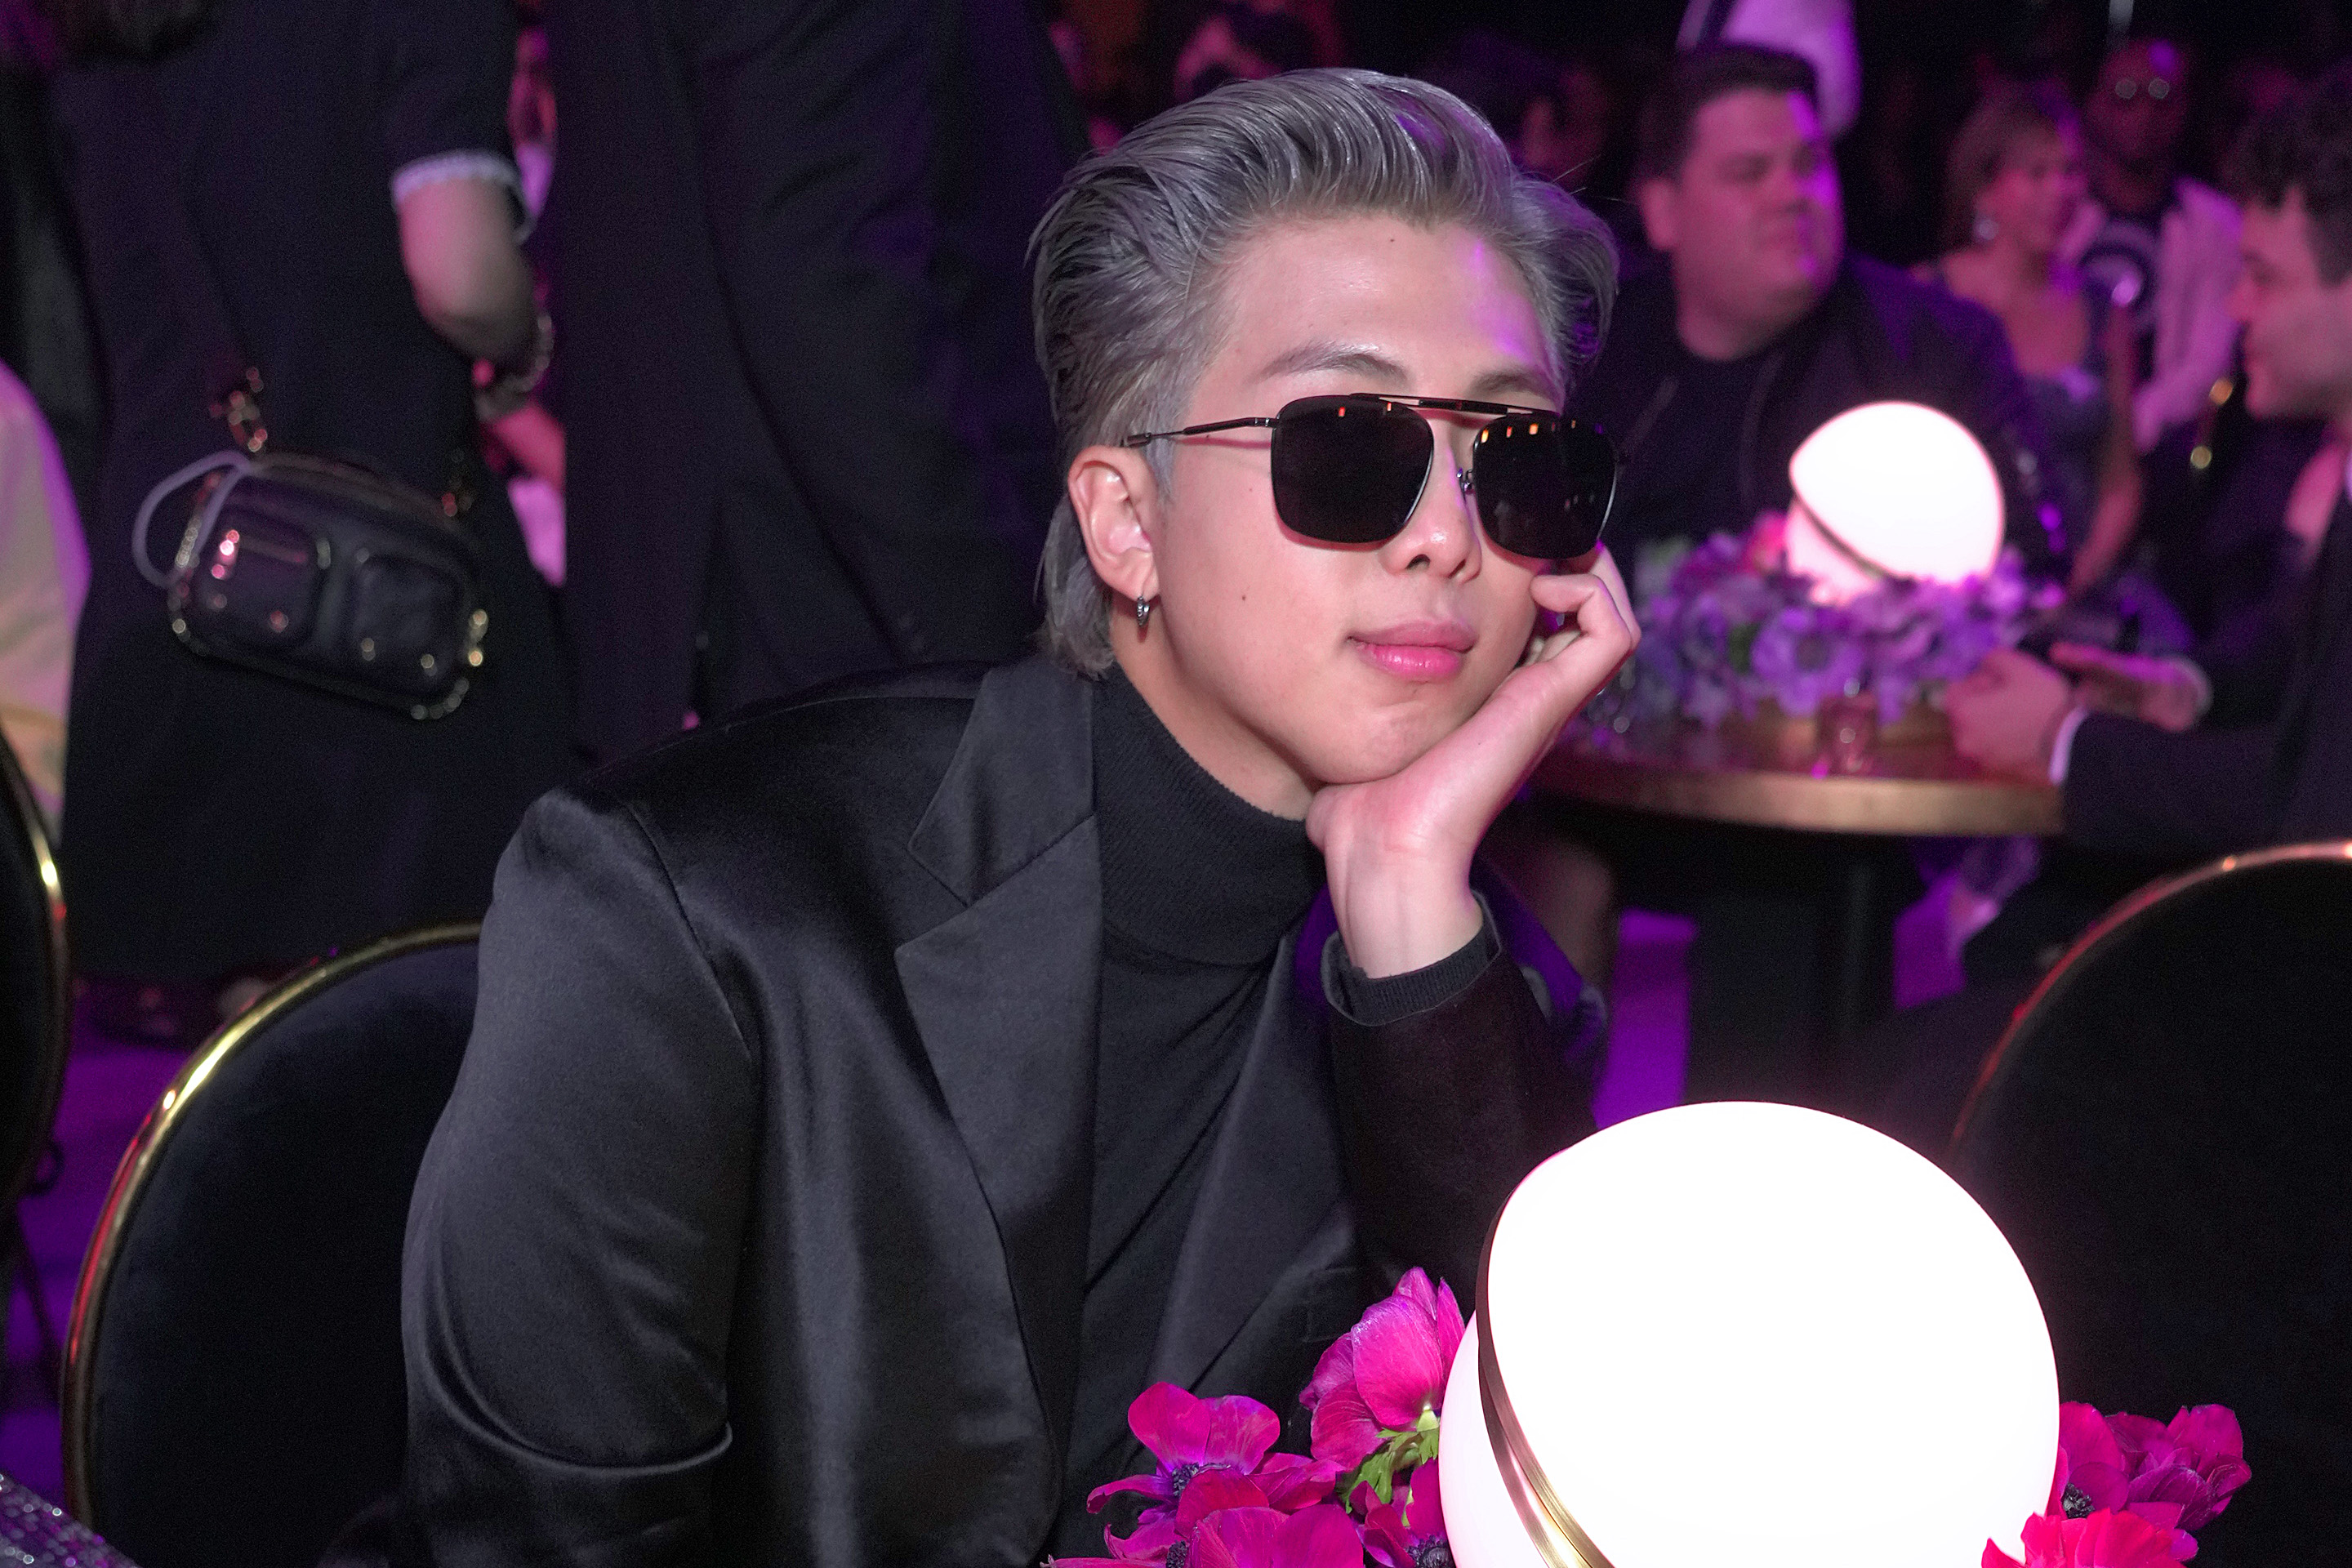 RM of BTS attends the 64th Annual GRAMMY Awards